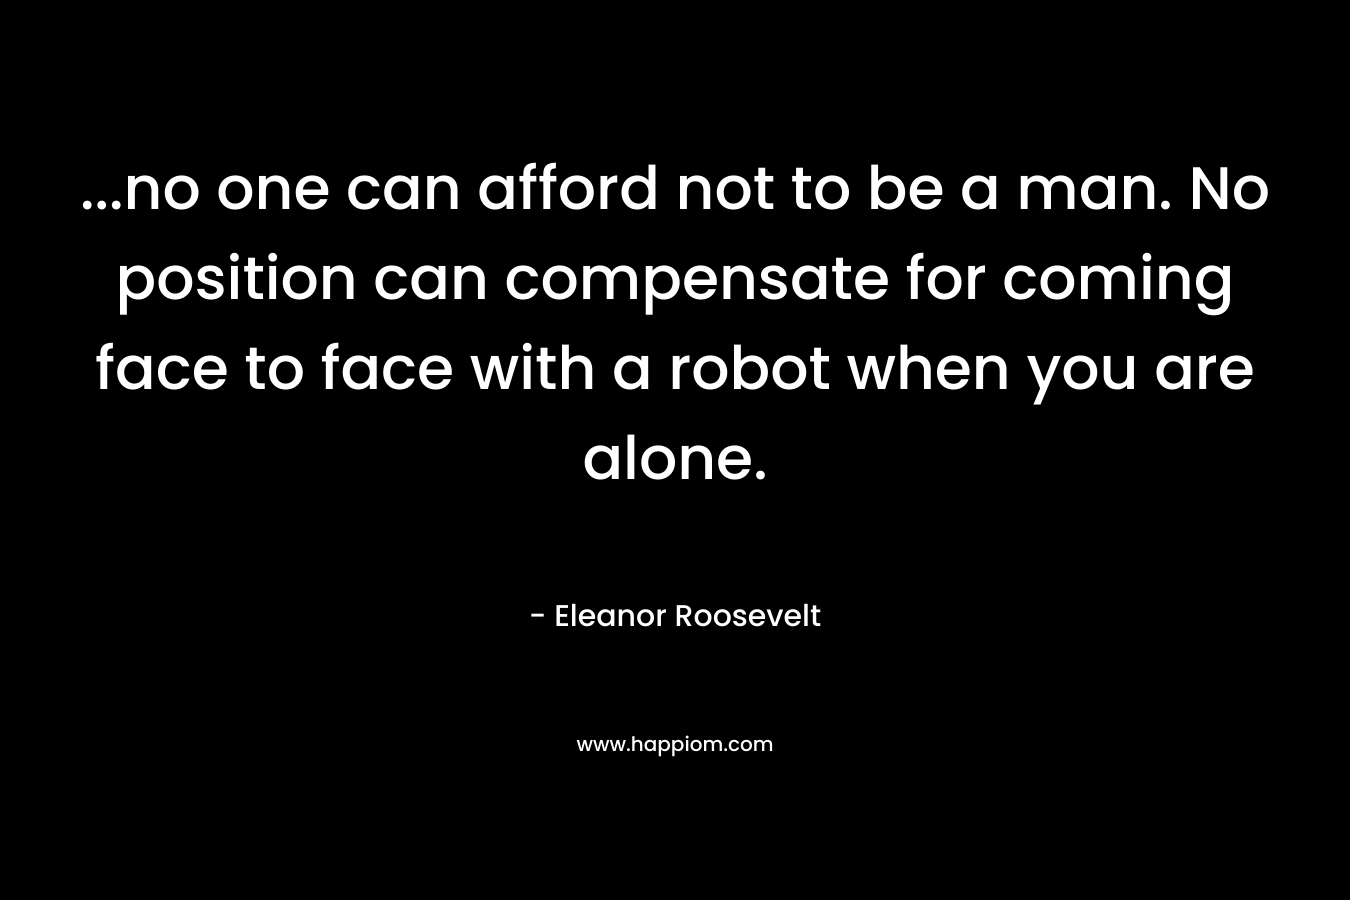 …no one can afford not to be a man. No position can compensate for coming face to face with a robot when you are alone. – Eleanor Roosevelt